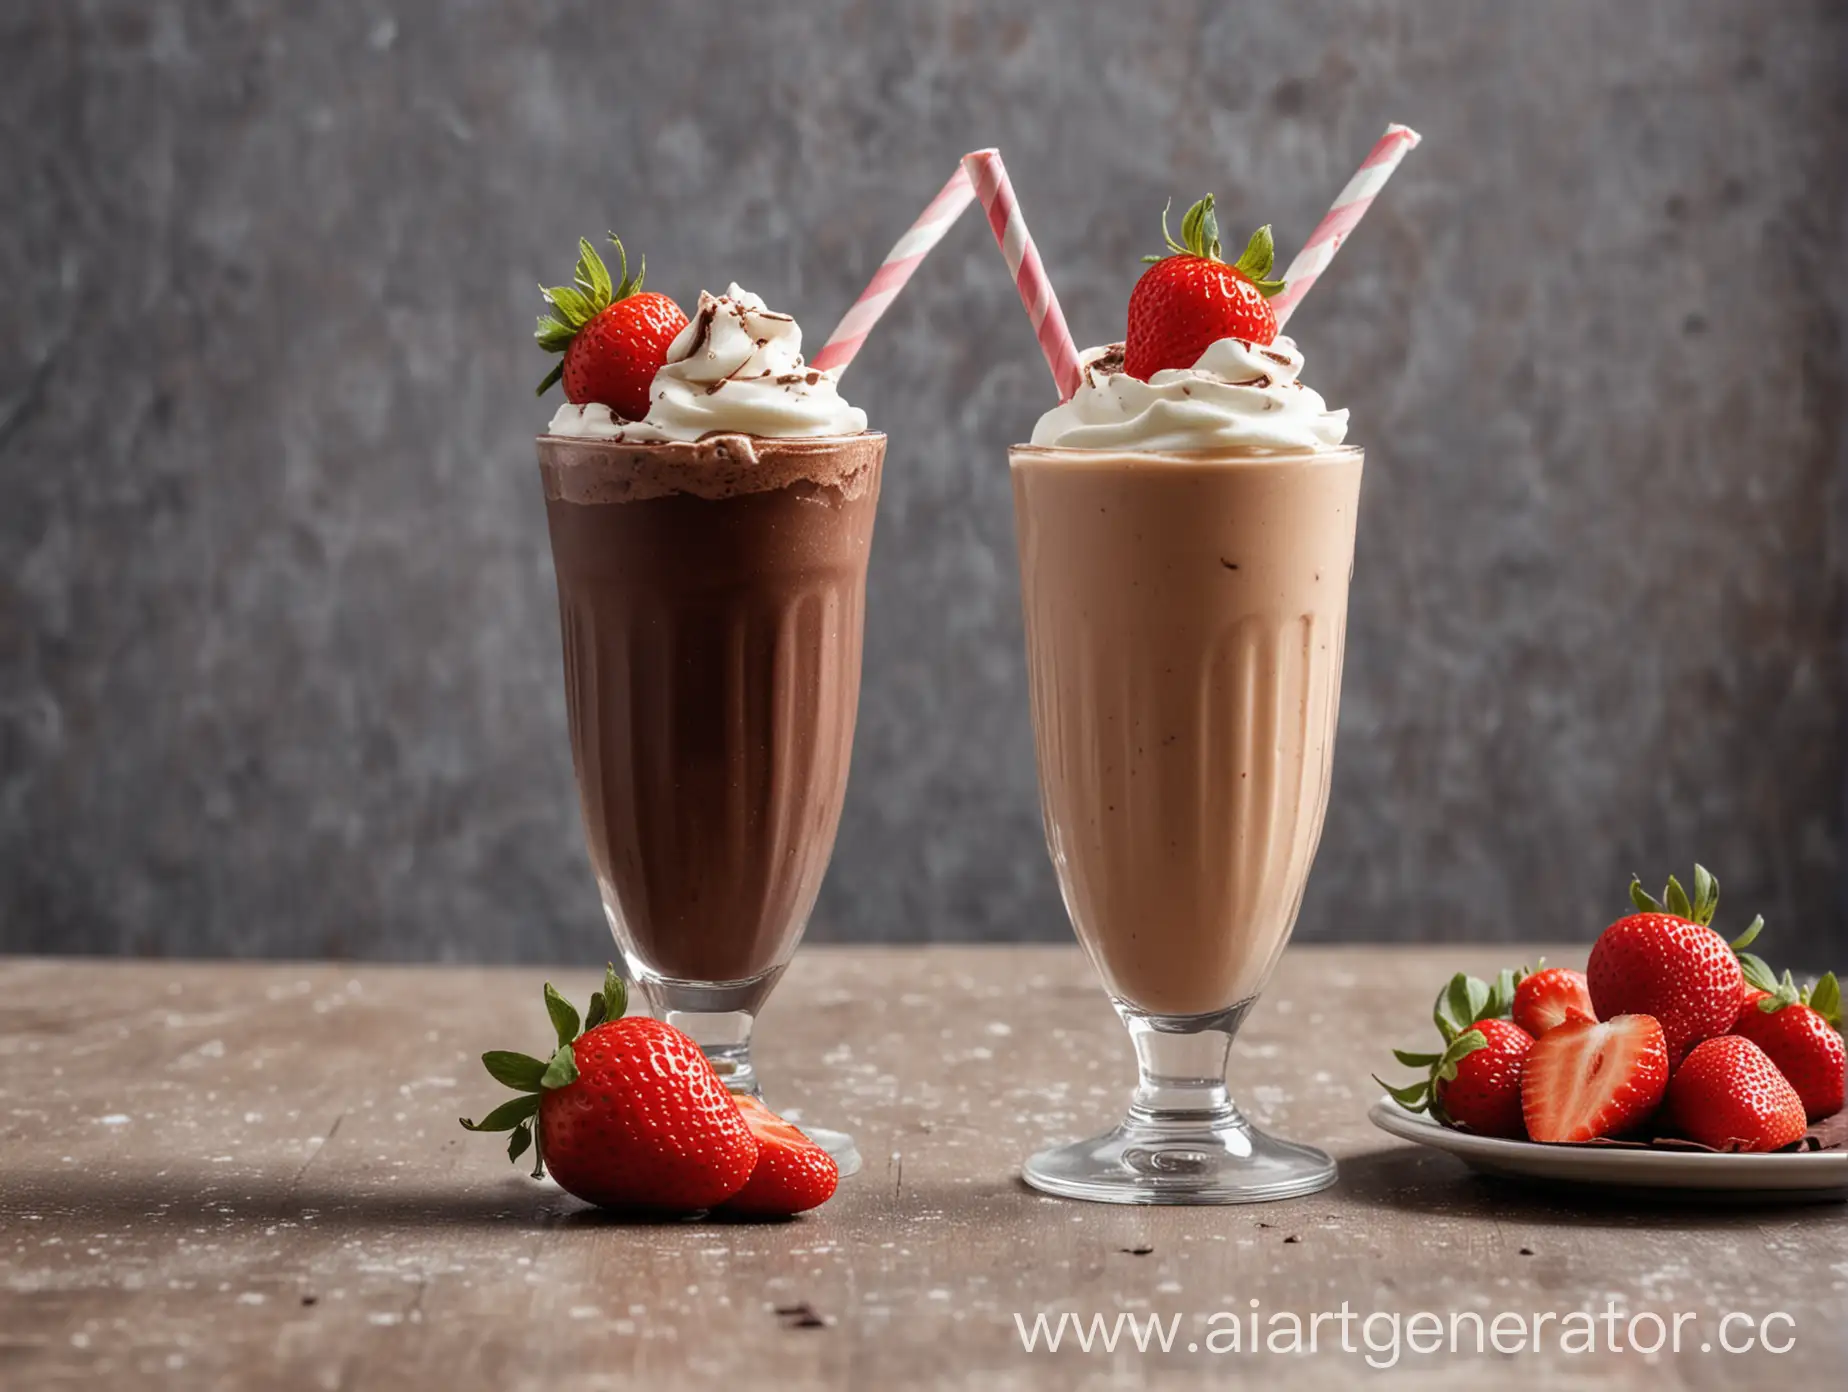 Front-View-of-Milkshake-and-Chocolatecovered-Strawberry-on-Table